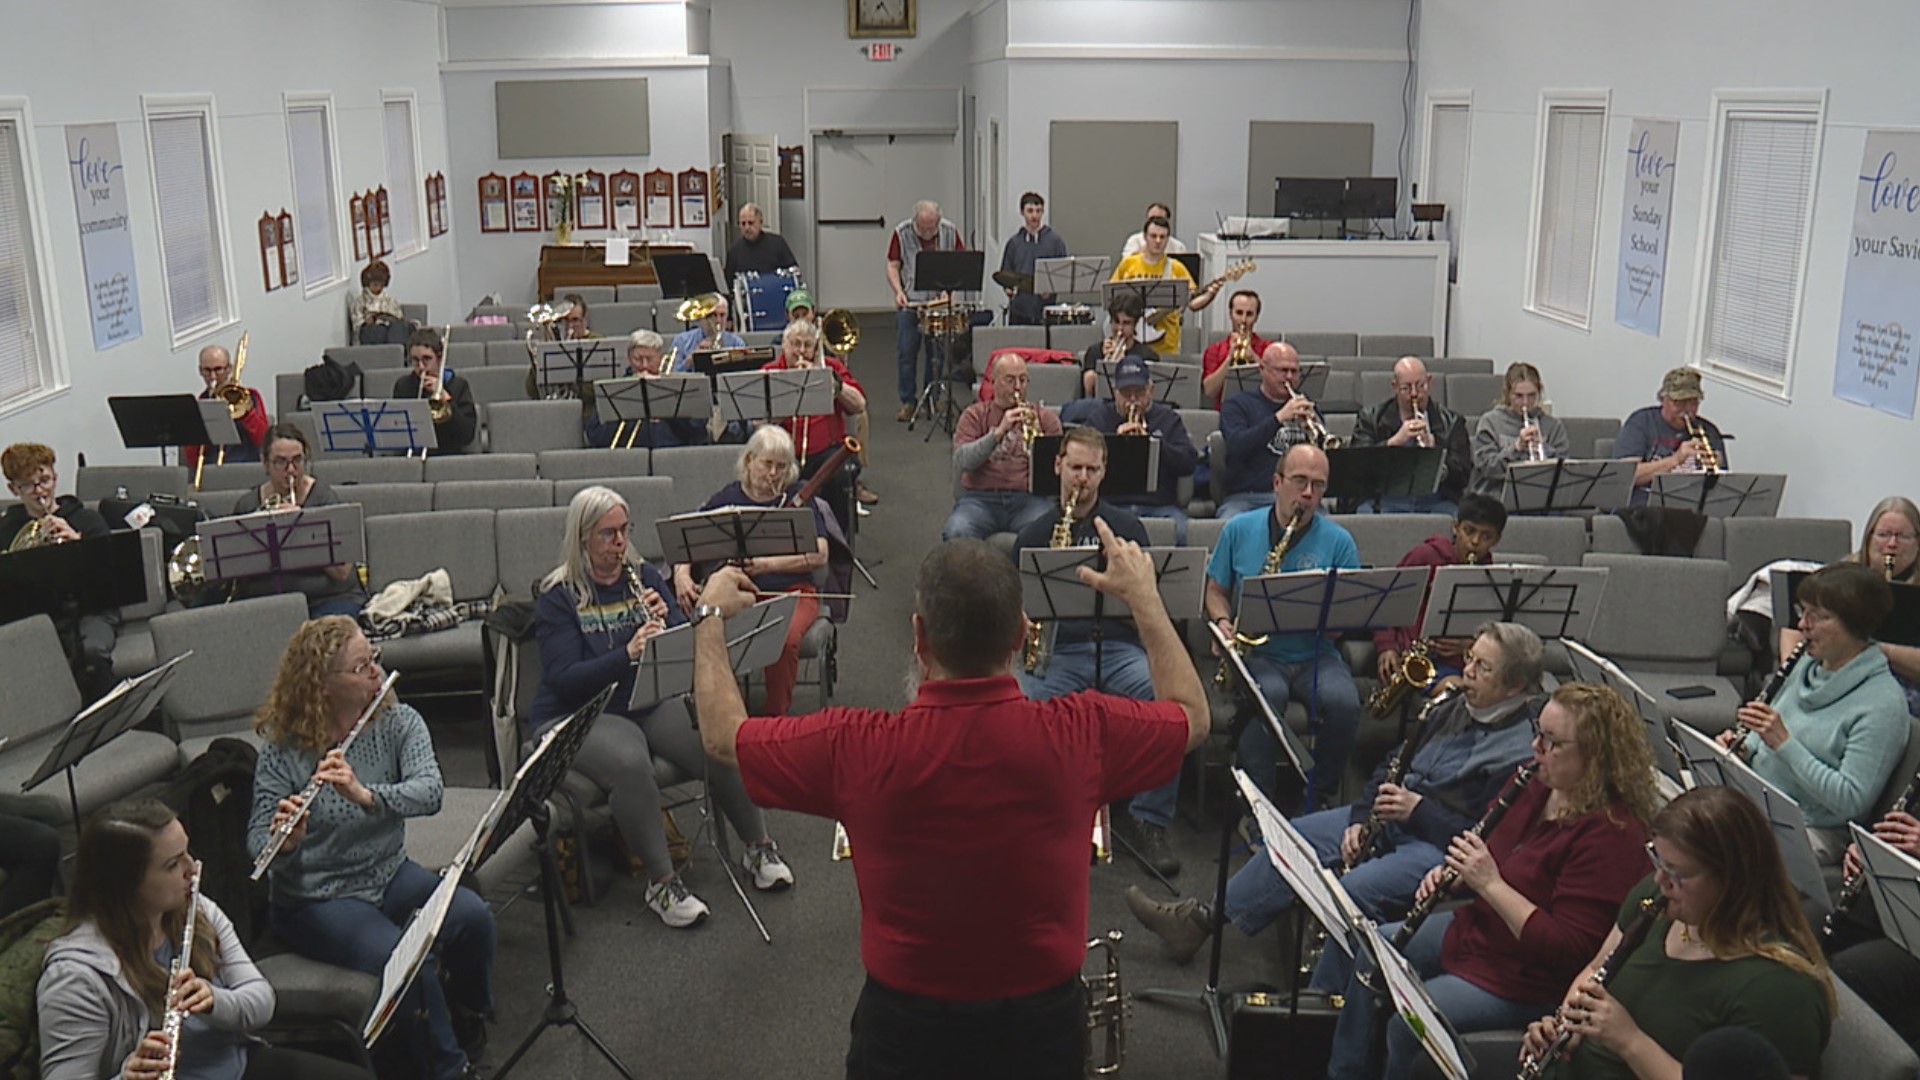 The community band boasts a roster of 60 to 70 instrumentalists who perform concerts each season for community events across central Pennsylvania.